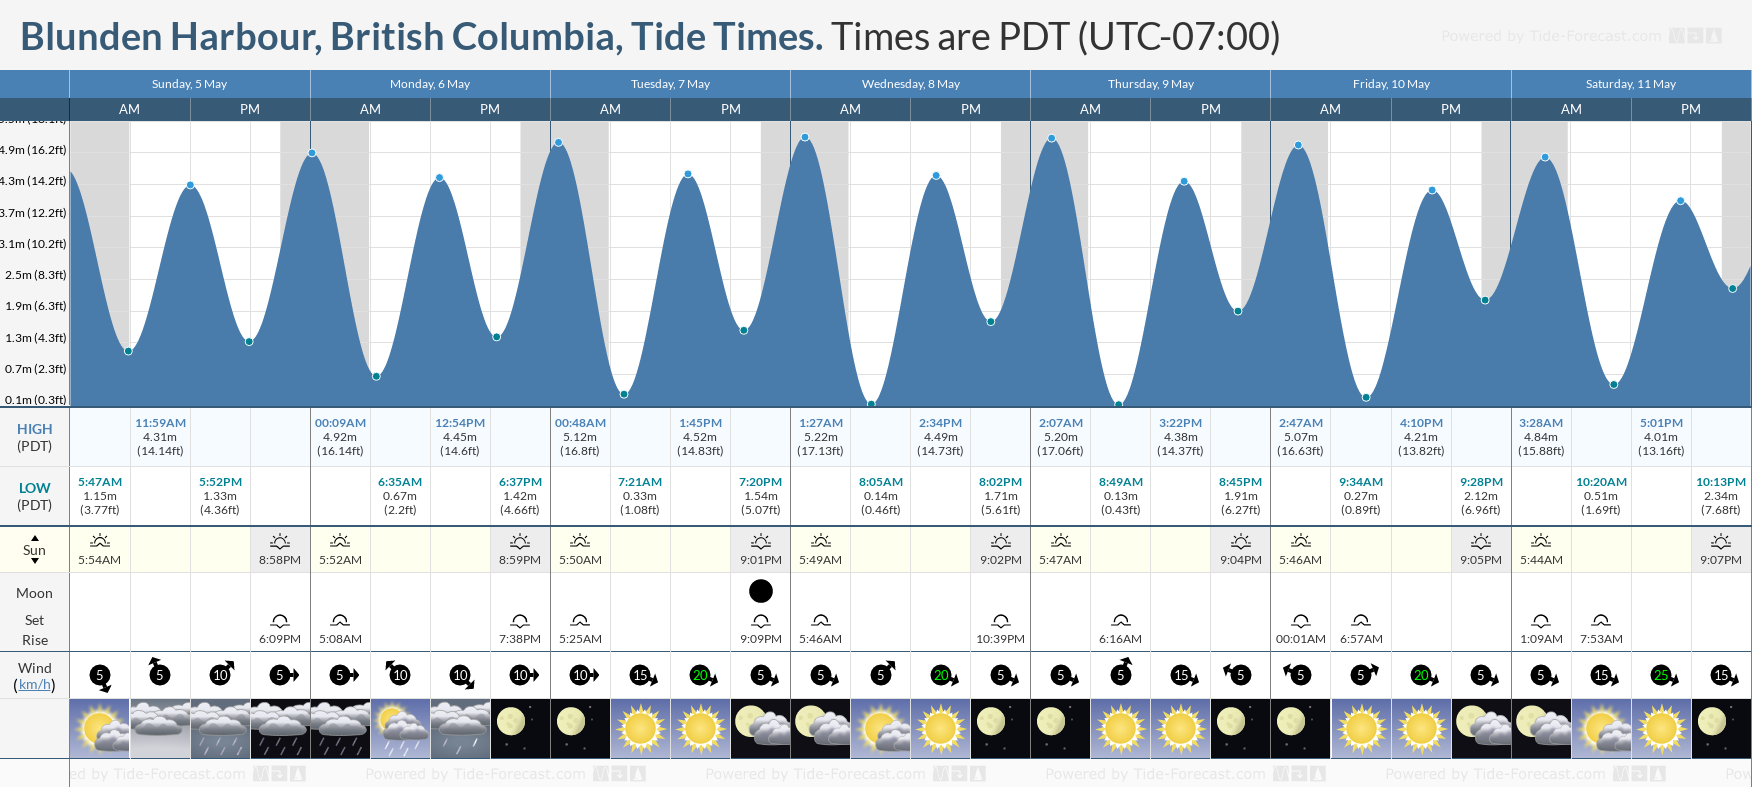 Blunden Harbour, British Columbia Tide Chart including high and low tide tide times for the next 7 days